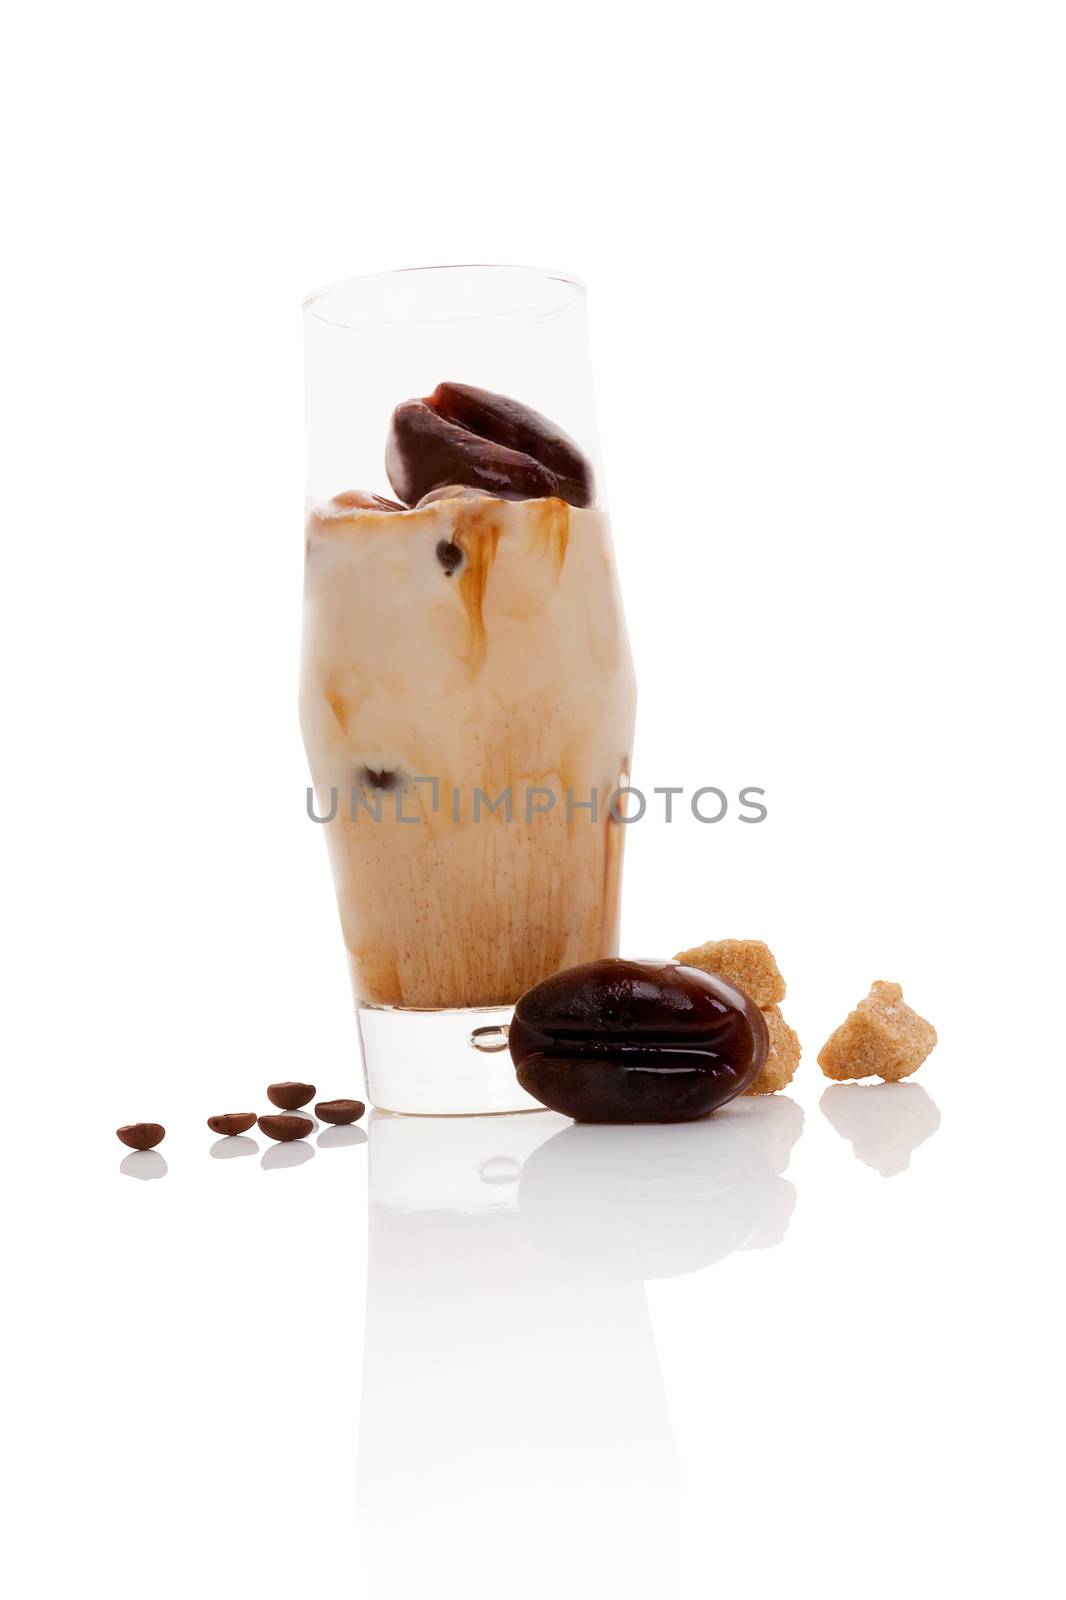 Delicious iced coffee on white background. Traditional coffee drinking.